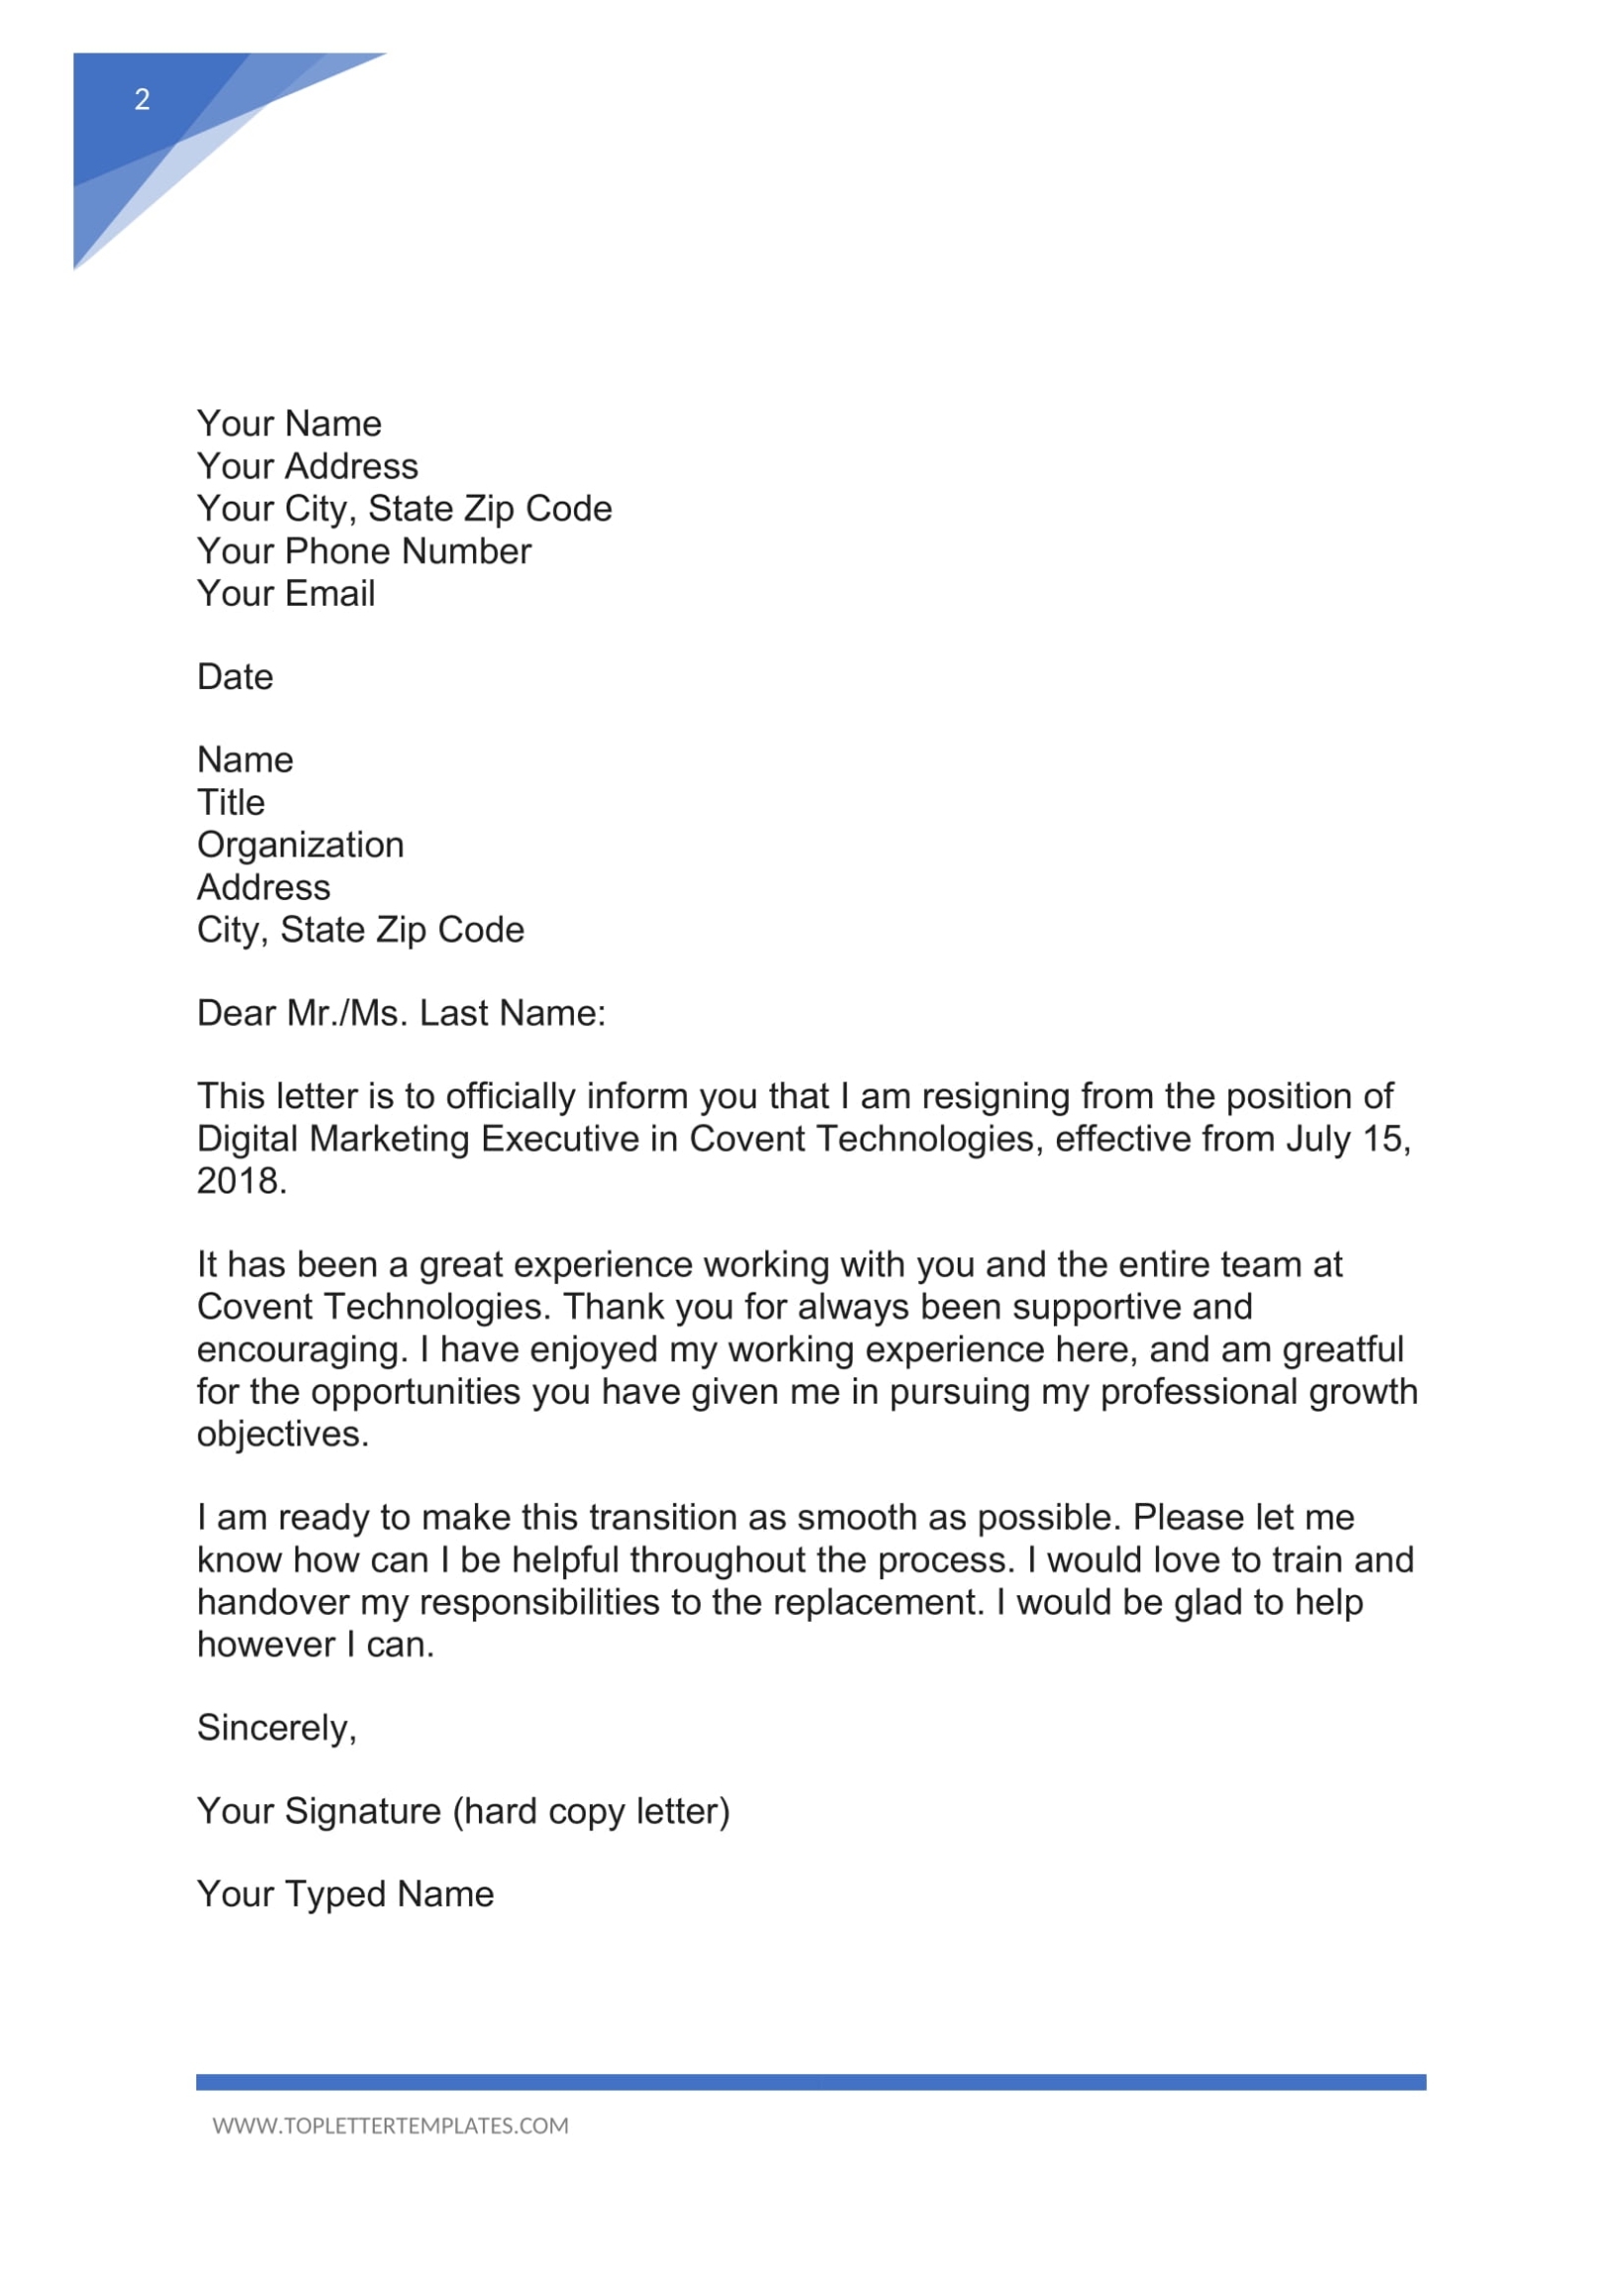 Sample Resignation Letter Template - Collection - Letter Templates Within Draft Letter Of Resignation Template